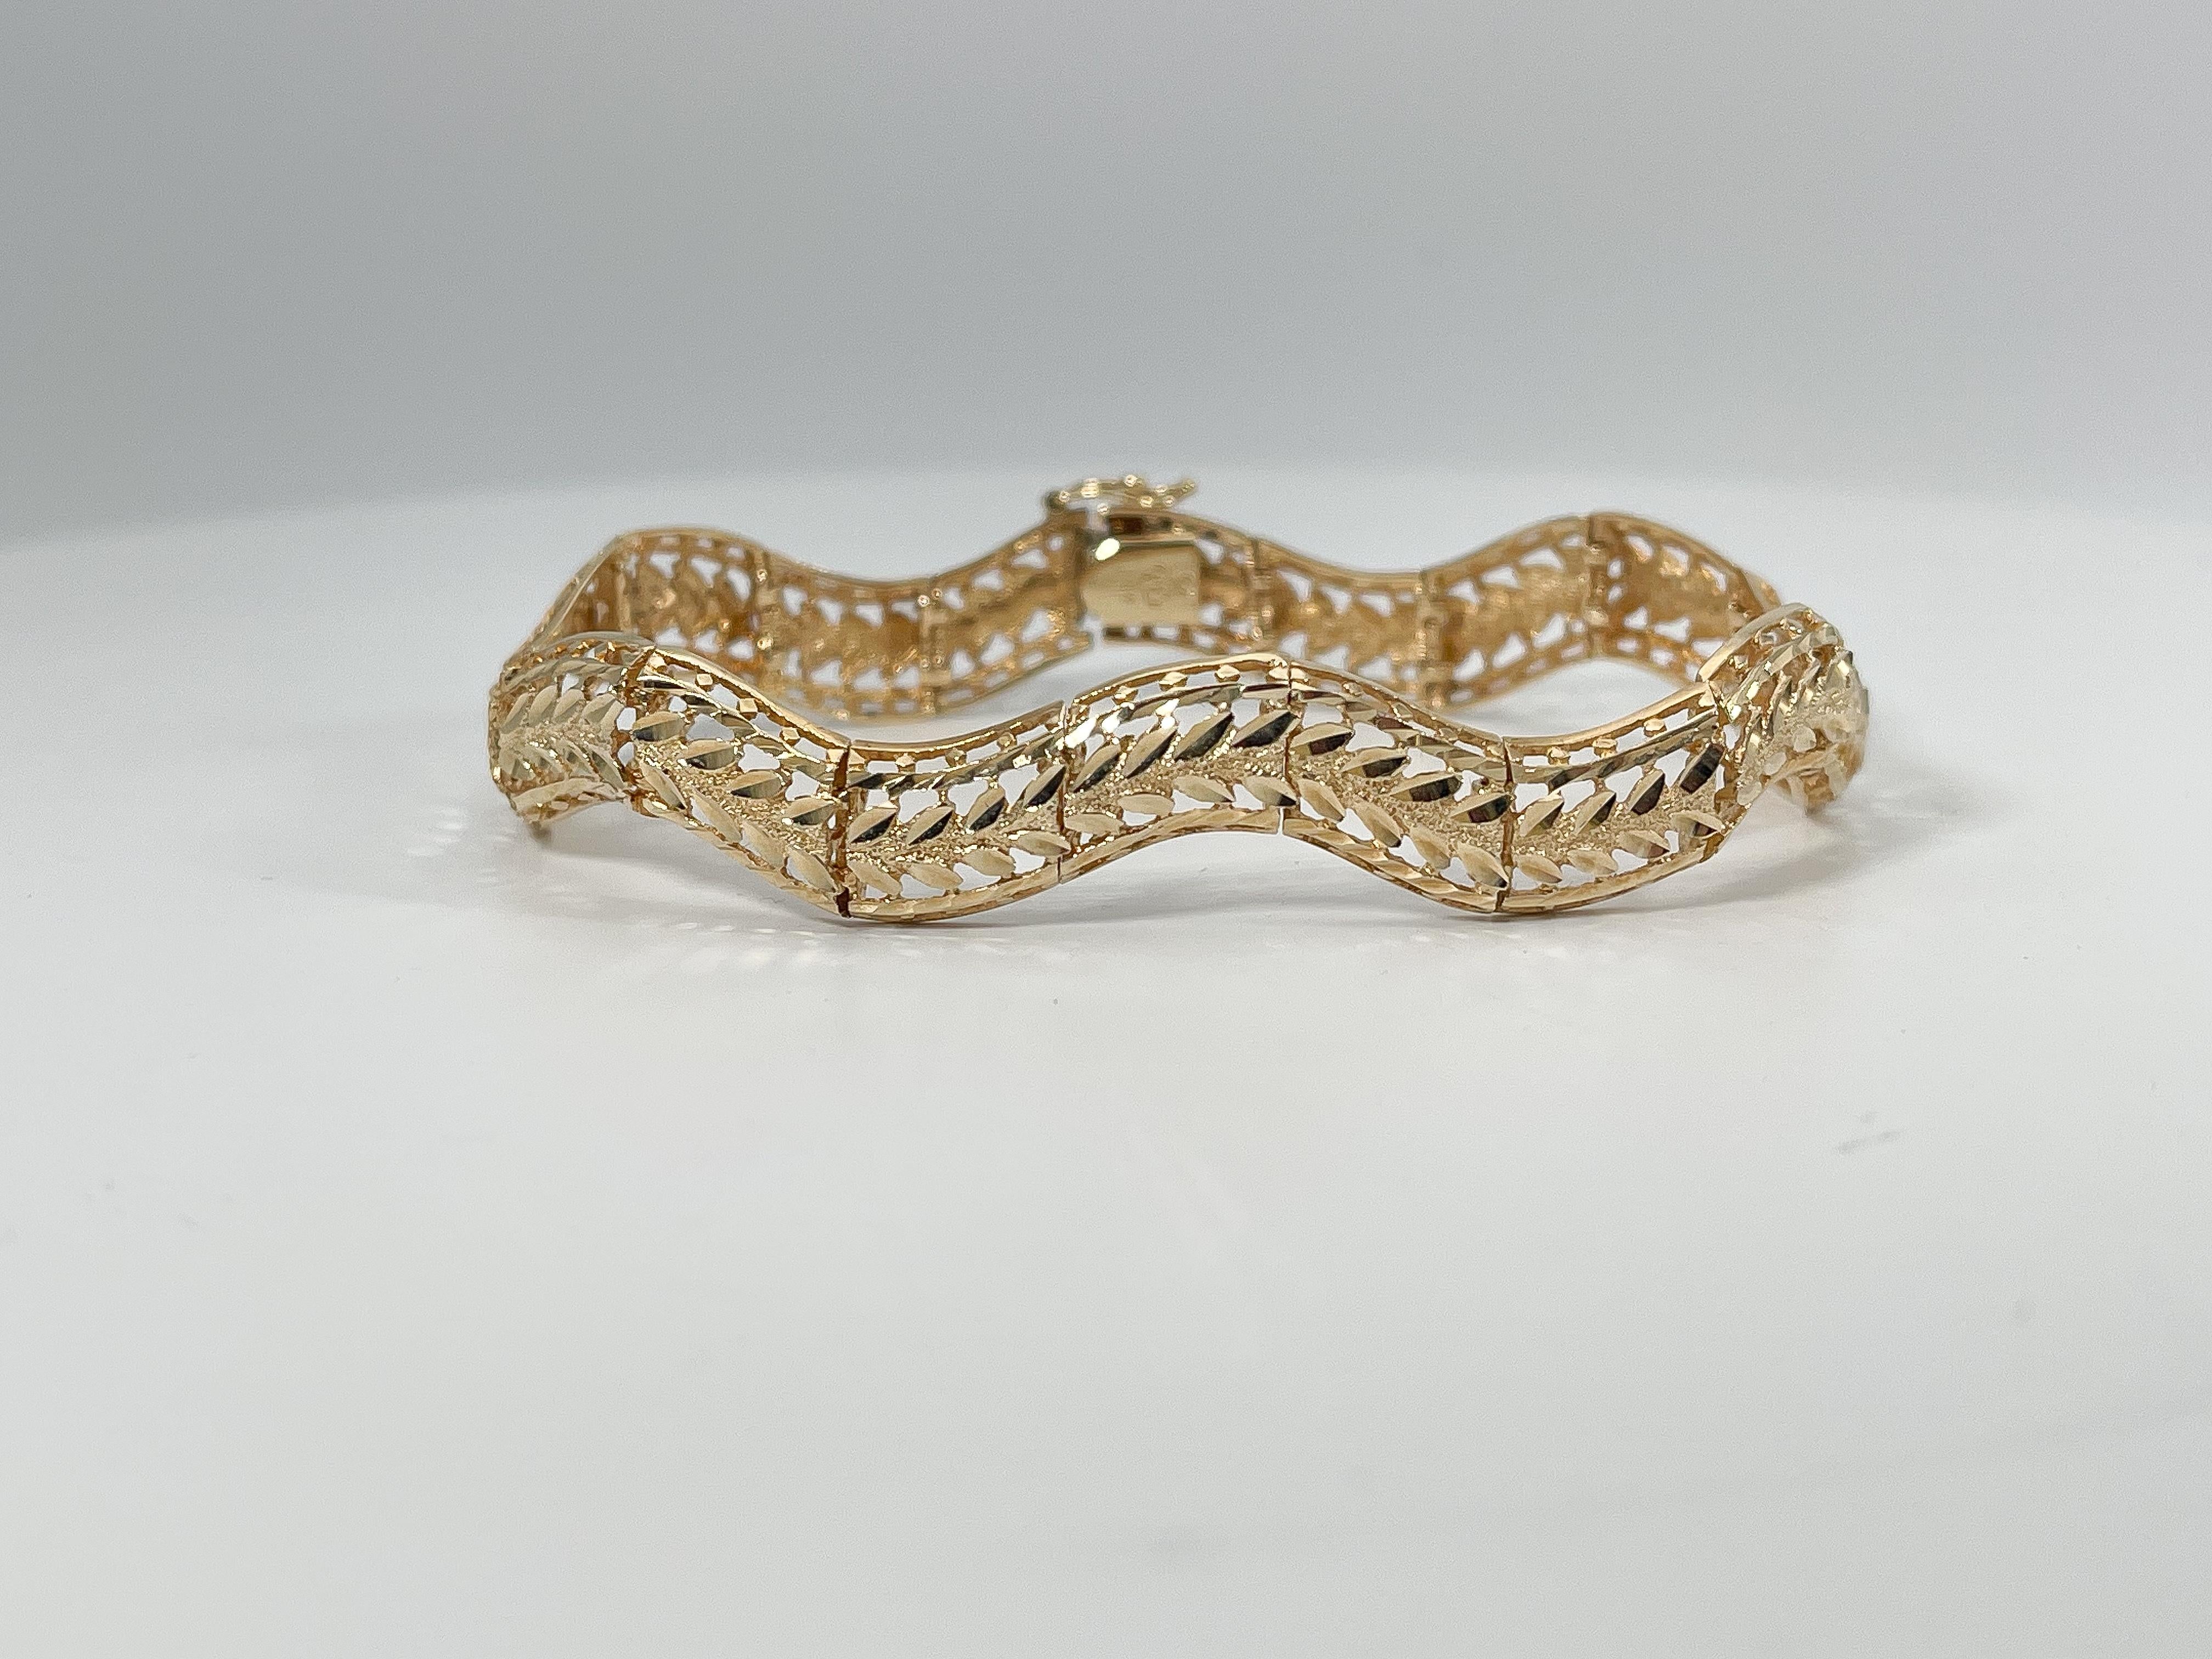 141k yellow gold diamond cut wave bracelet. This bracelet has a figure 8 clasp to open and close, the width is 8.5 mm, the length is 7.5 inches, and the total weight is 14.38 grams.